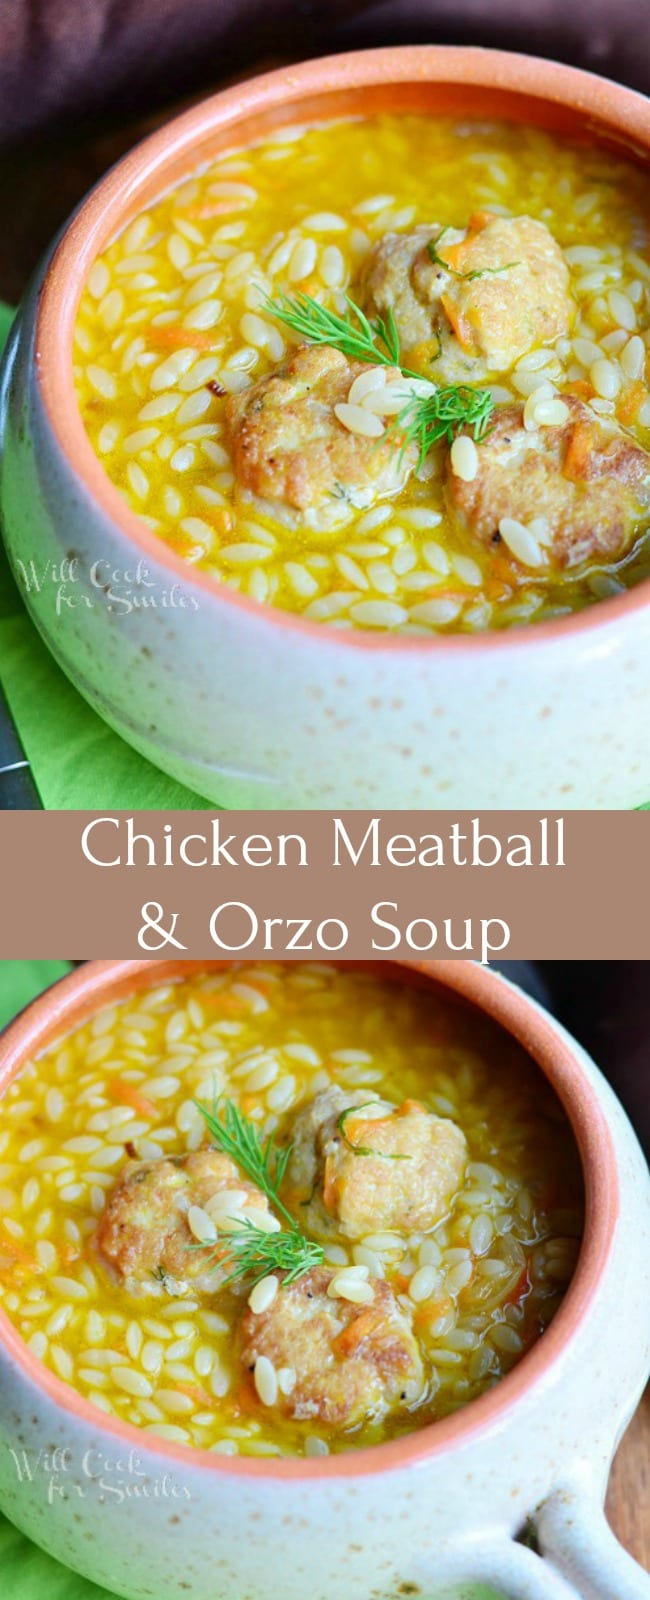 Chicken Meatball & Orzo Soup in a bowl